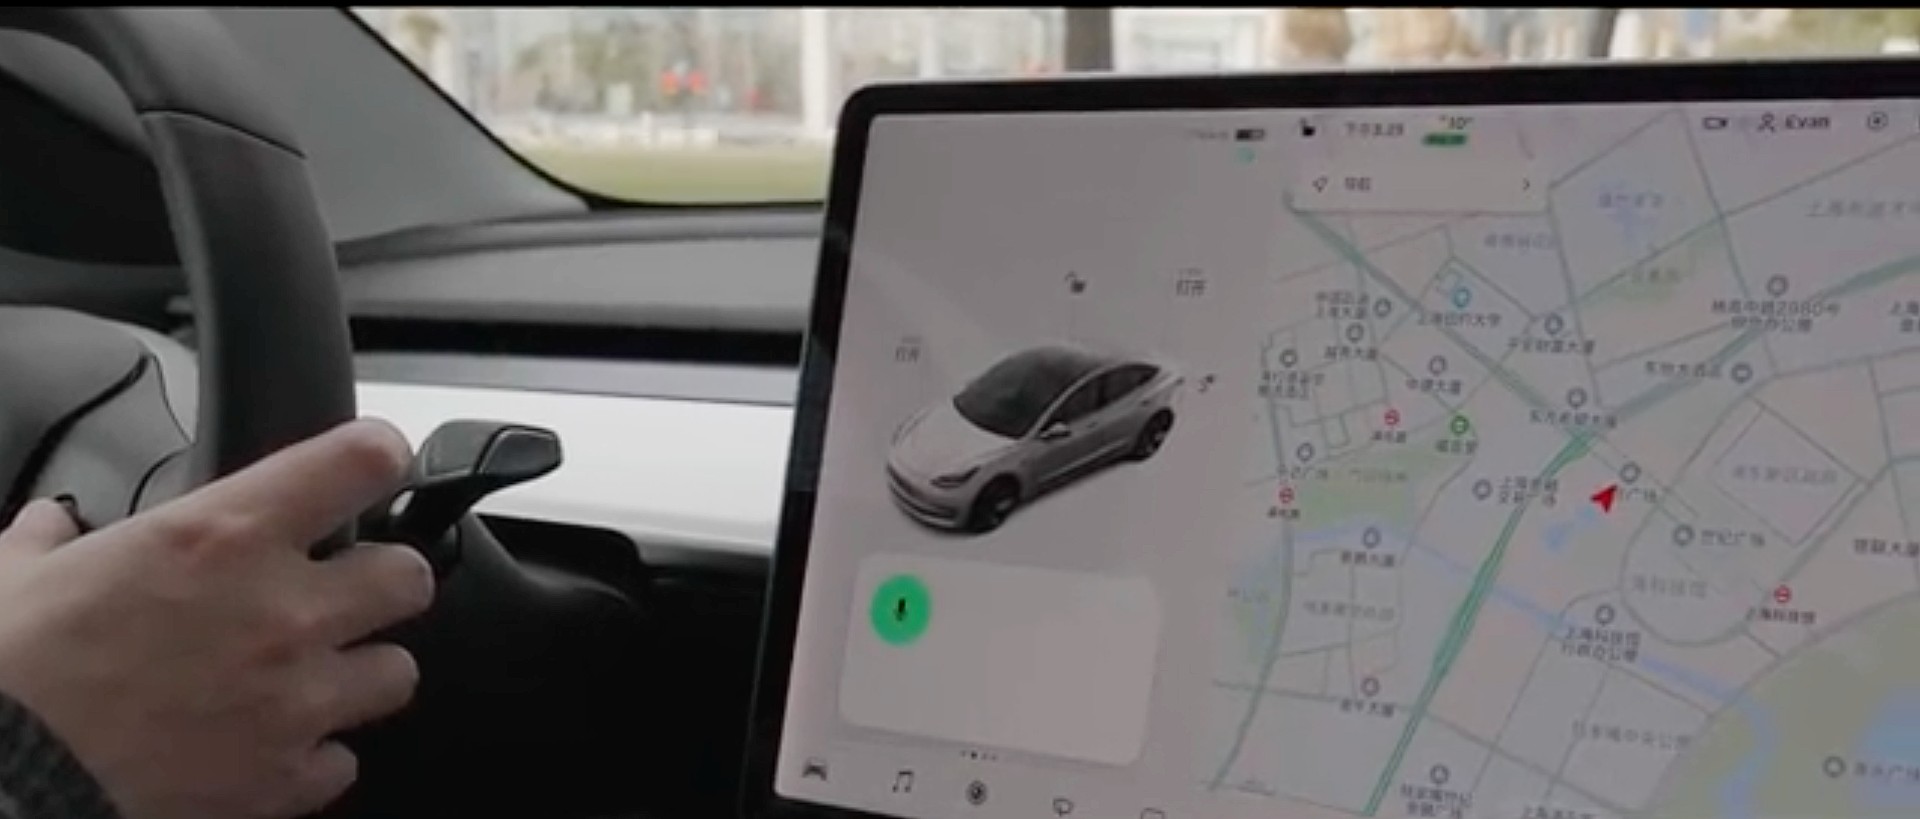 tesla-voice-recognition-china-new-year